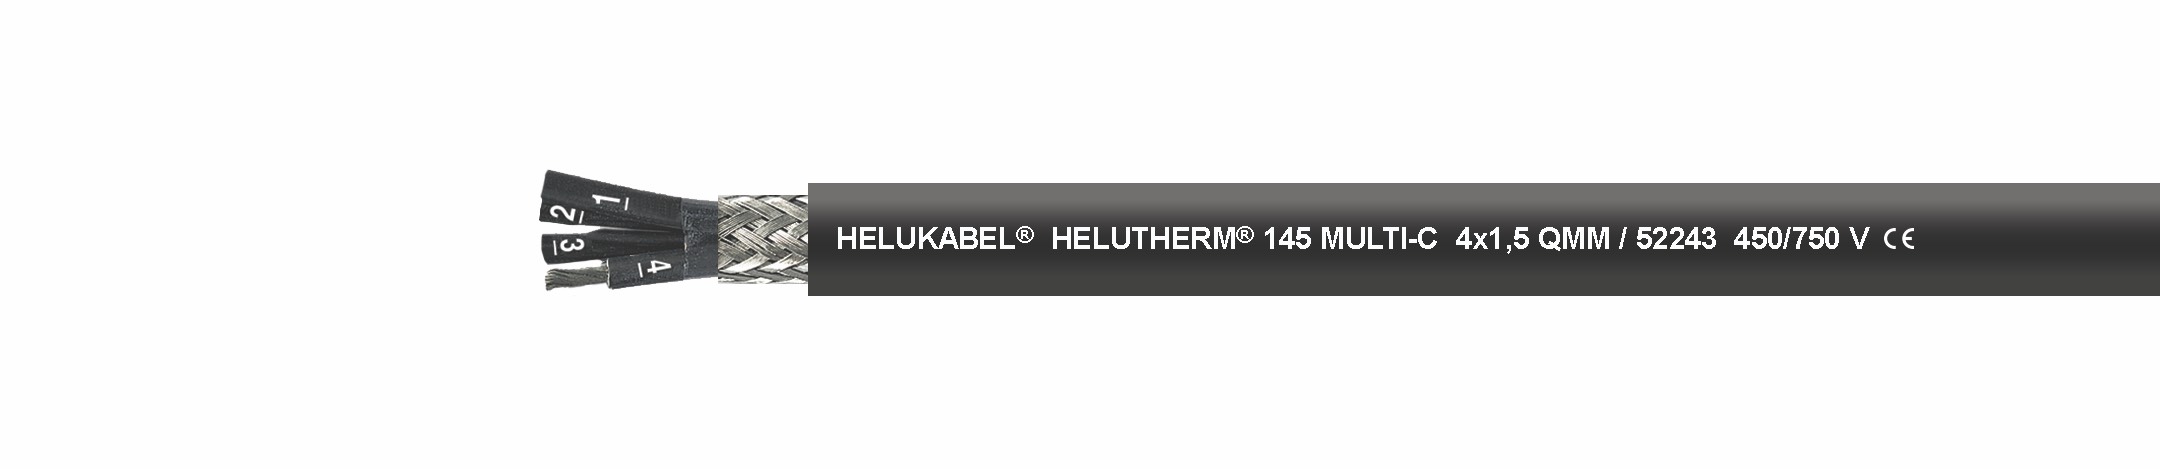 Cable Helukabel: HELUTHERM 145 MULTI-C